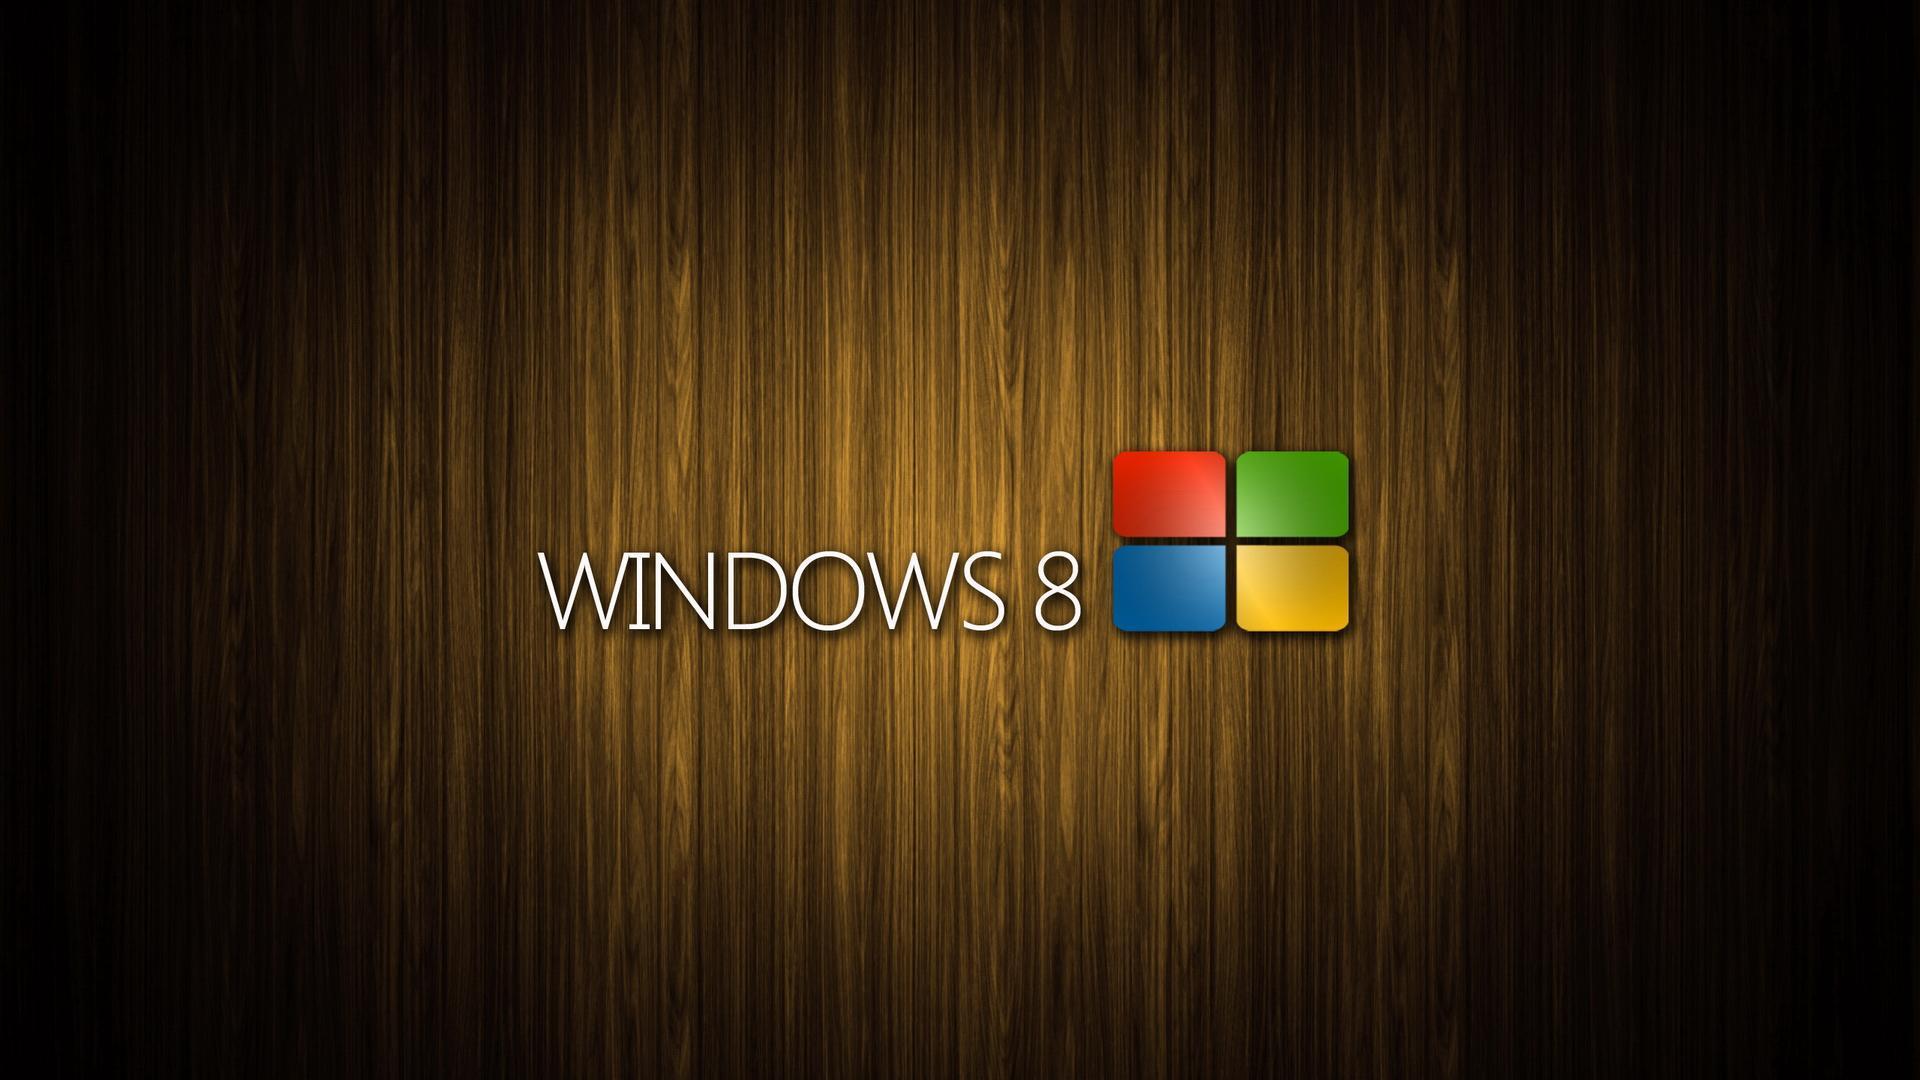 Windows 8 Wallpapers 1080p - Wallpaper Cave Full Hd Wallpapers For Windows 8 1920x1080